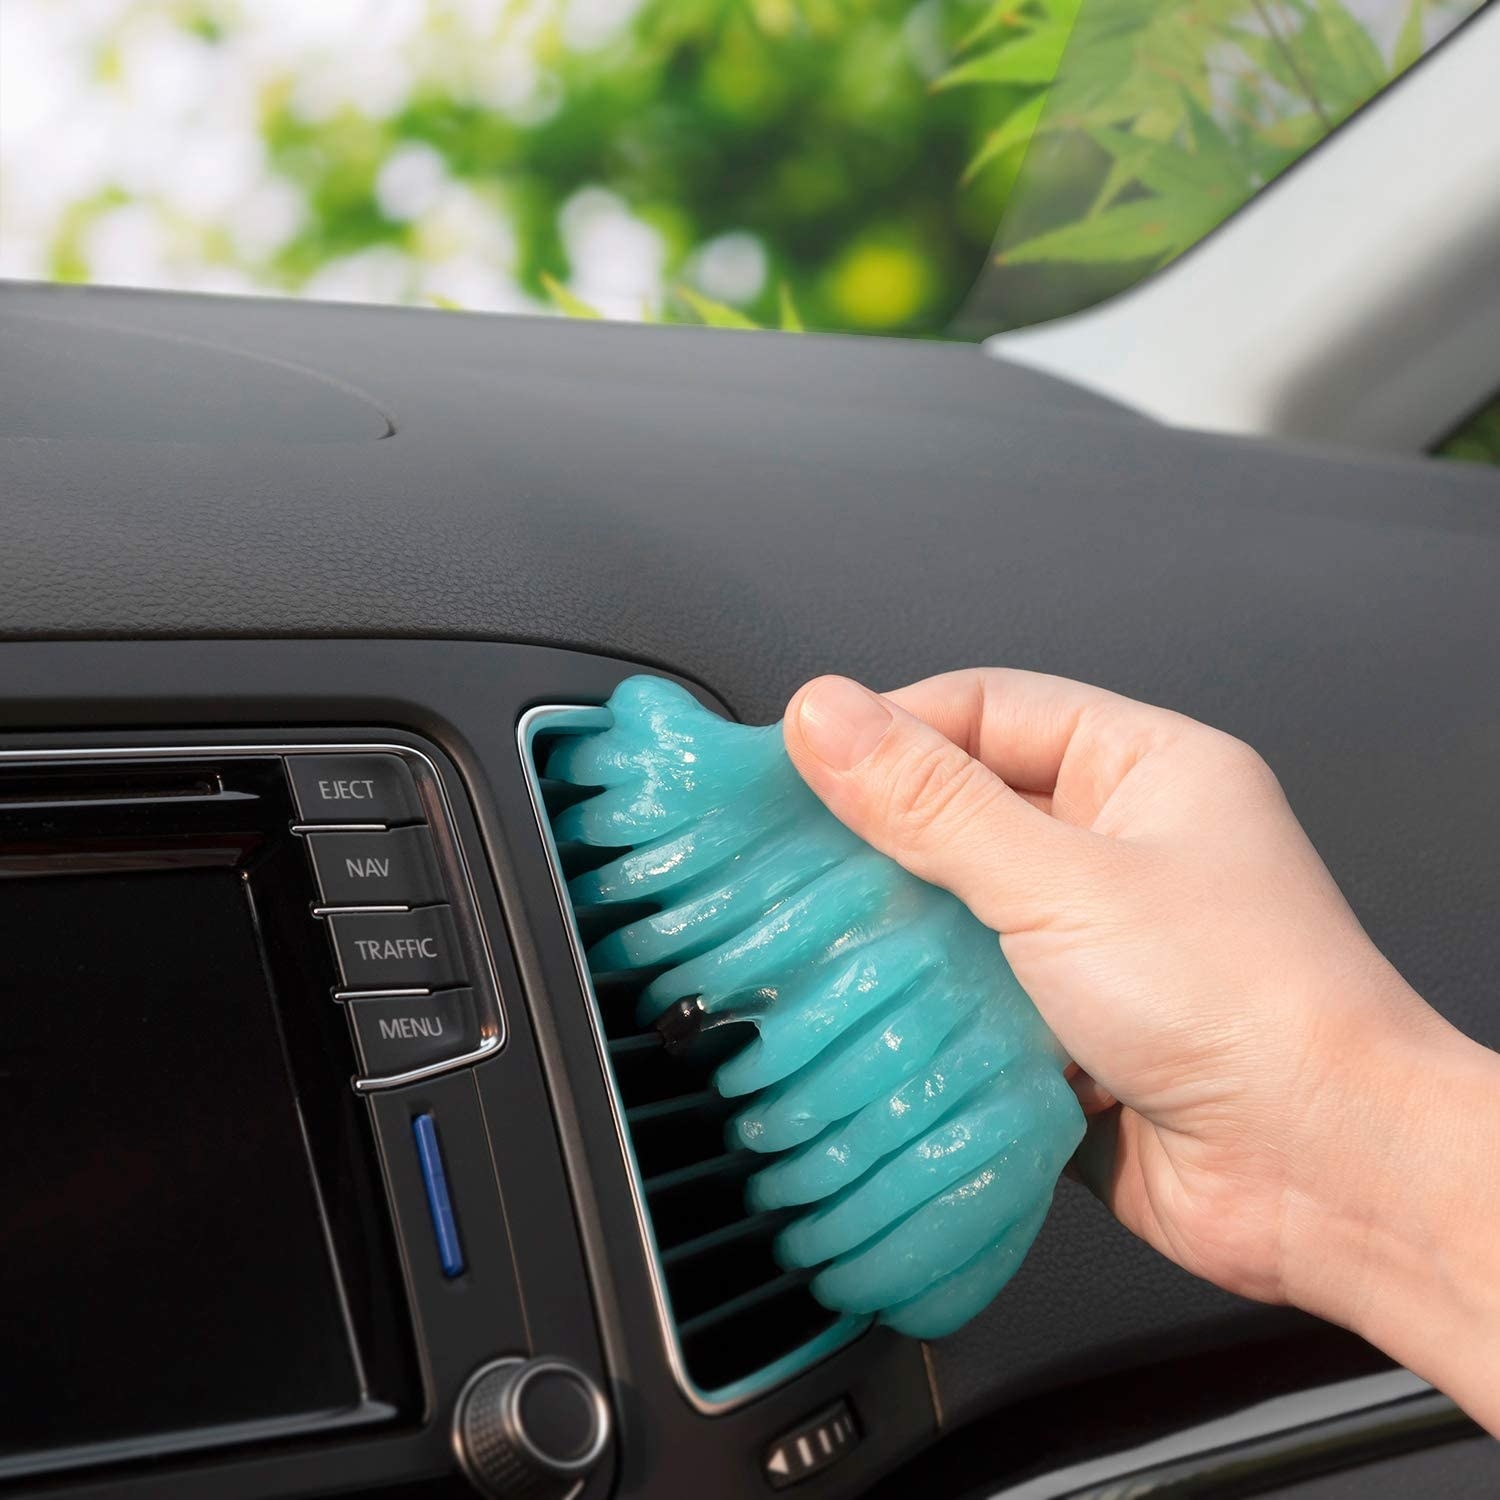 the cleaning putty being used on car vents